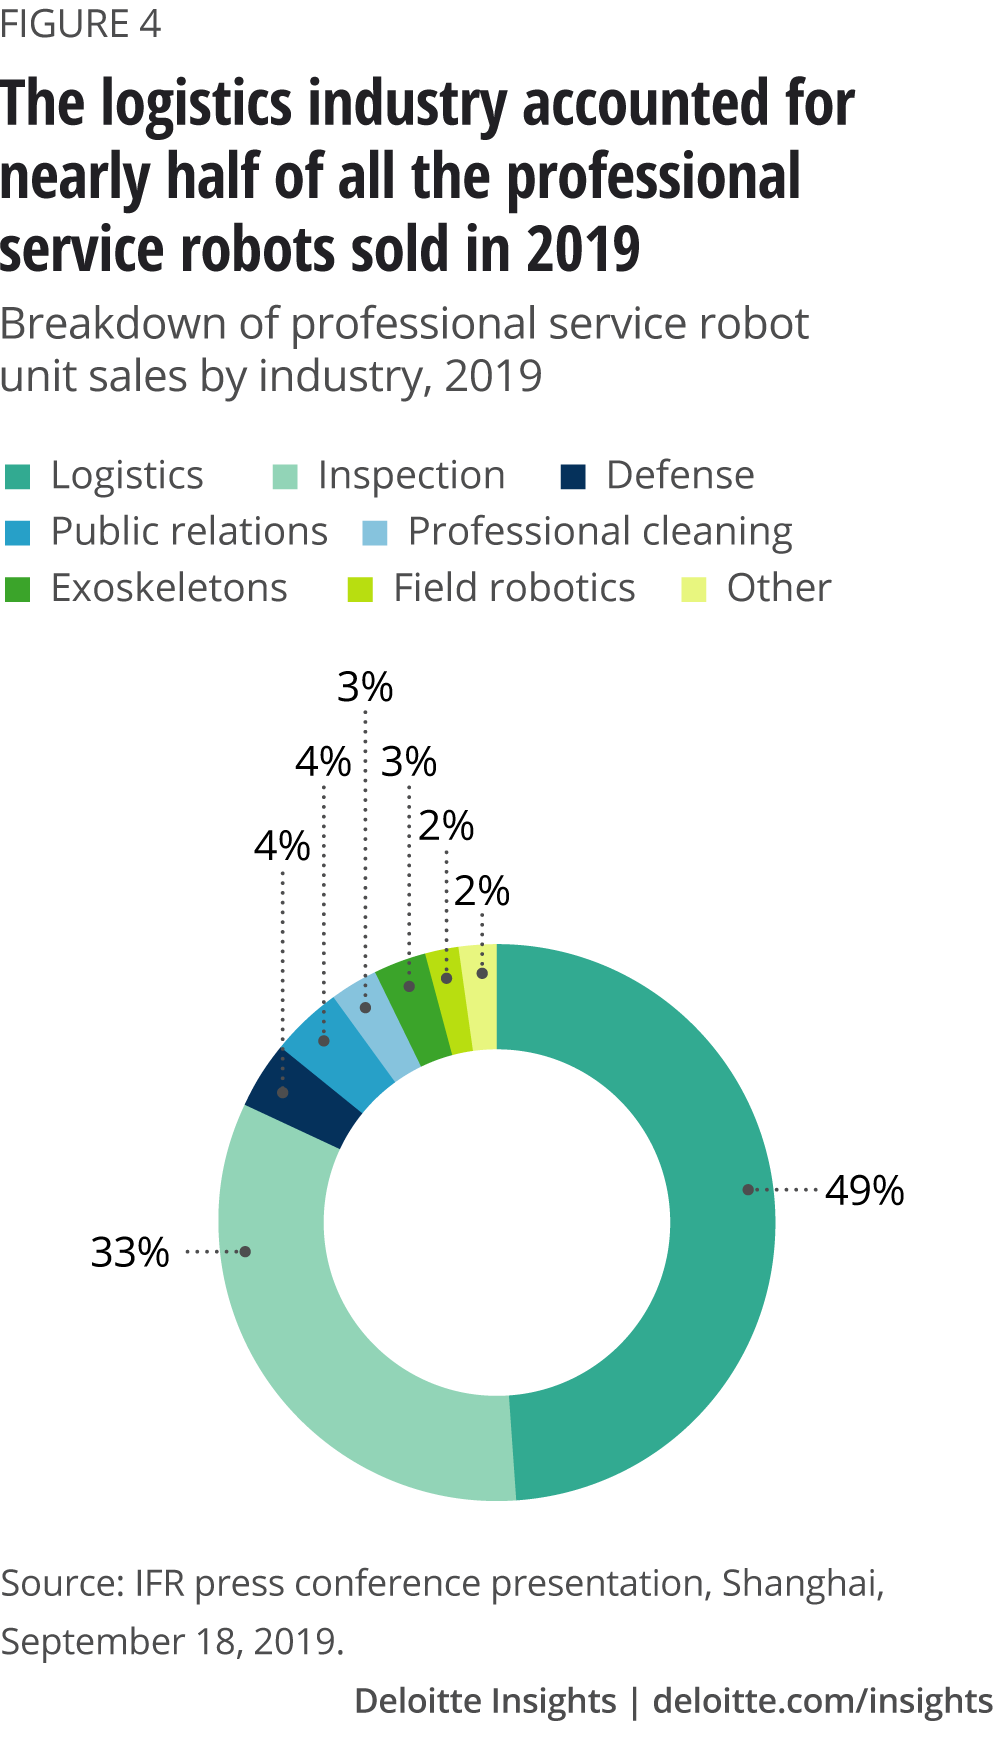 The logistics industry accounted for nearly half of all the professional service robots sold in 2019